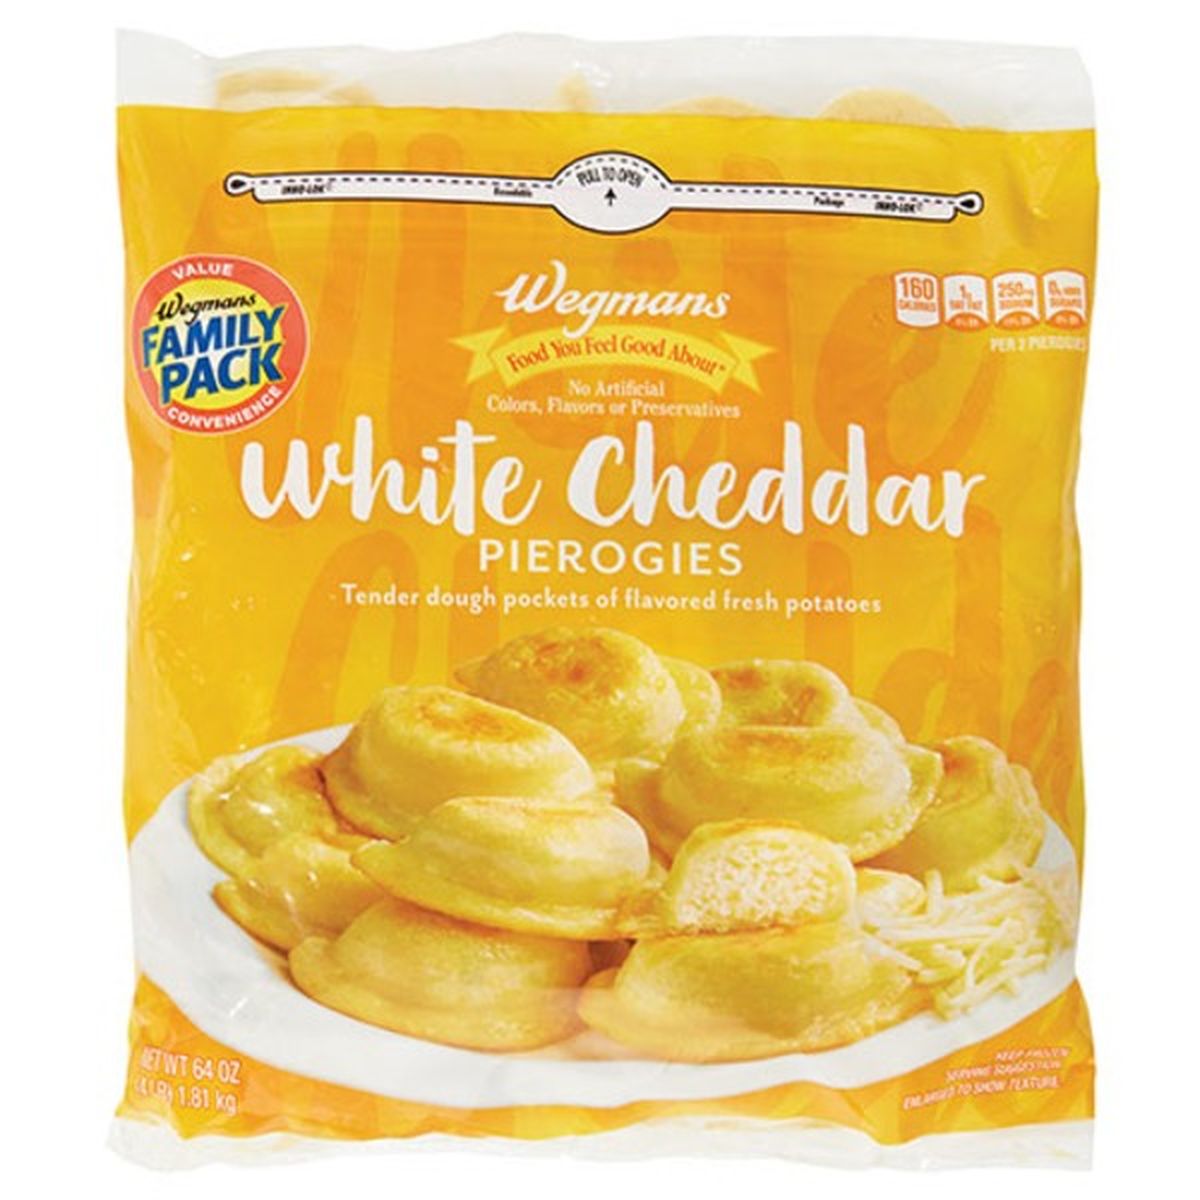 Calories in Wegmans White Cheddar Pierogies, FAMILY PACK